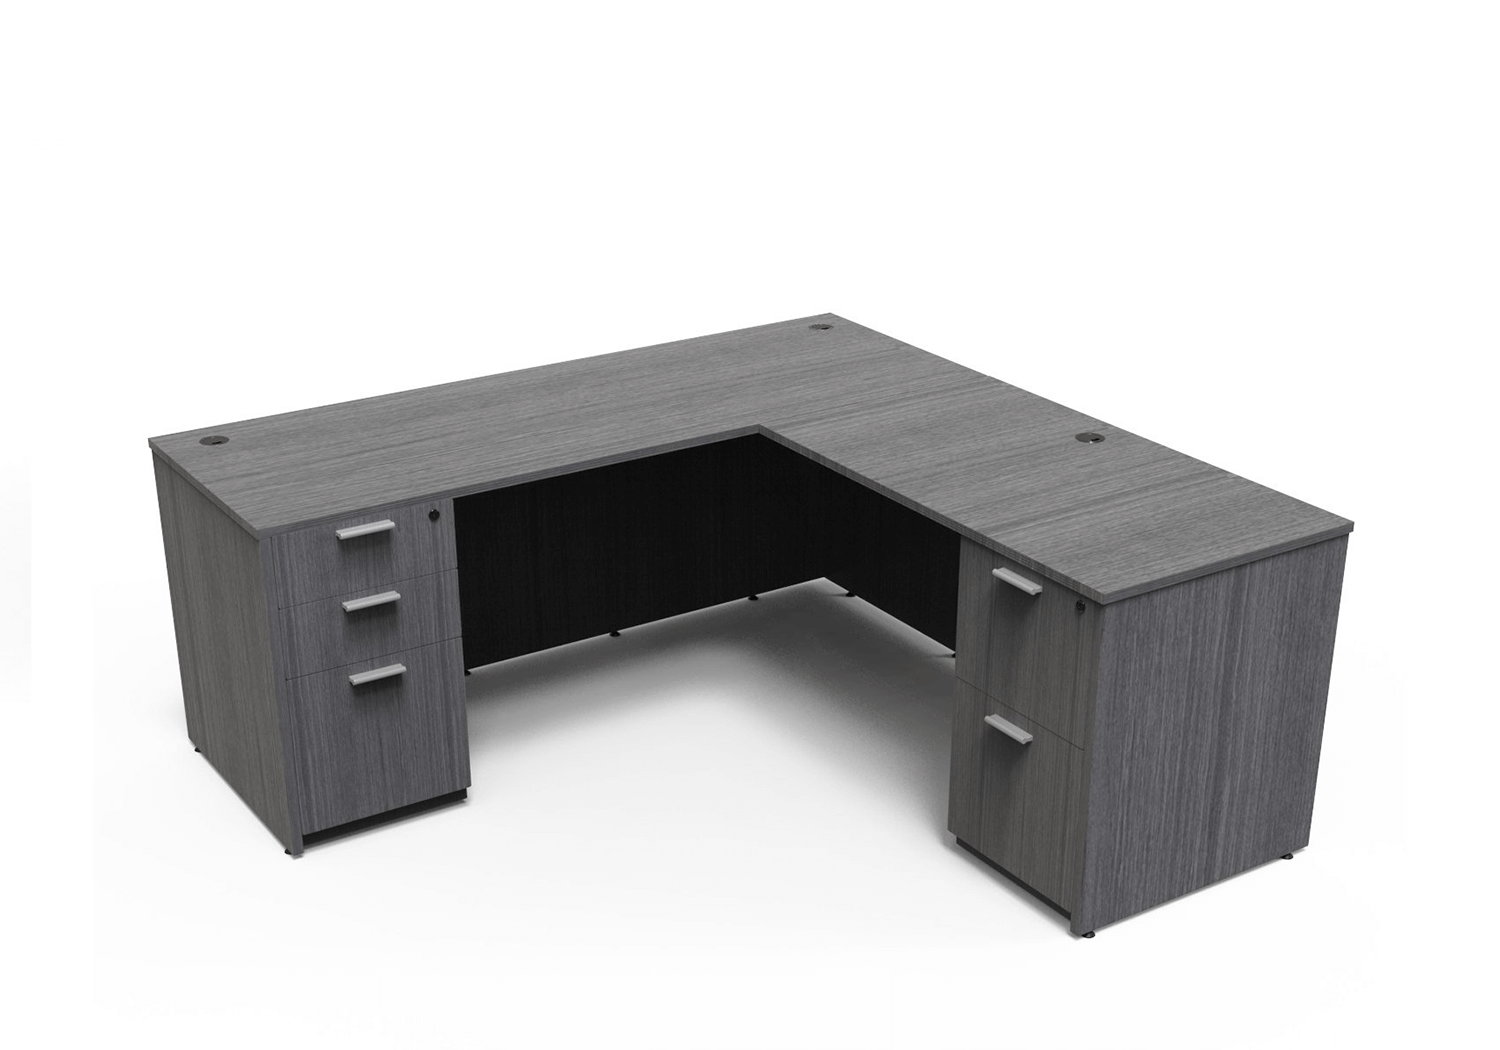 i5 L shaped Desk 30x66 with 24x48 Return  FREE SHIPPING